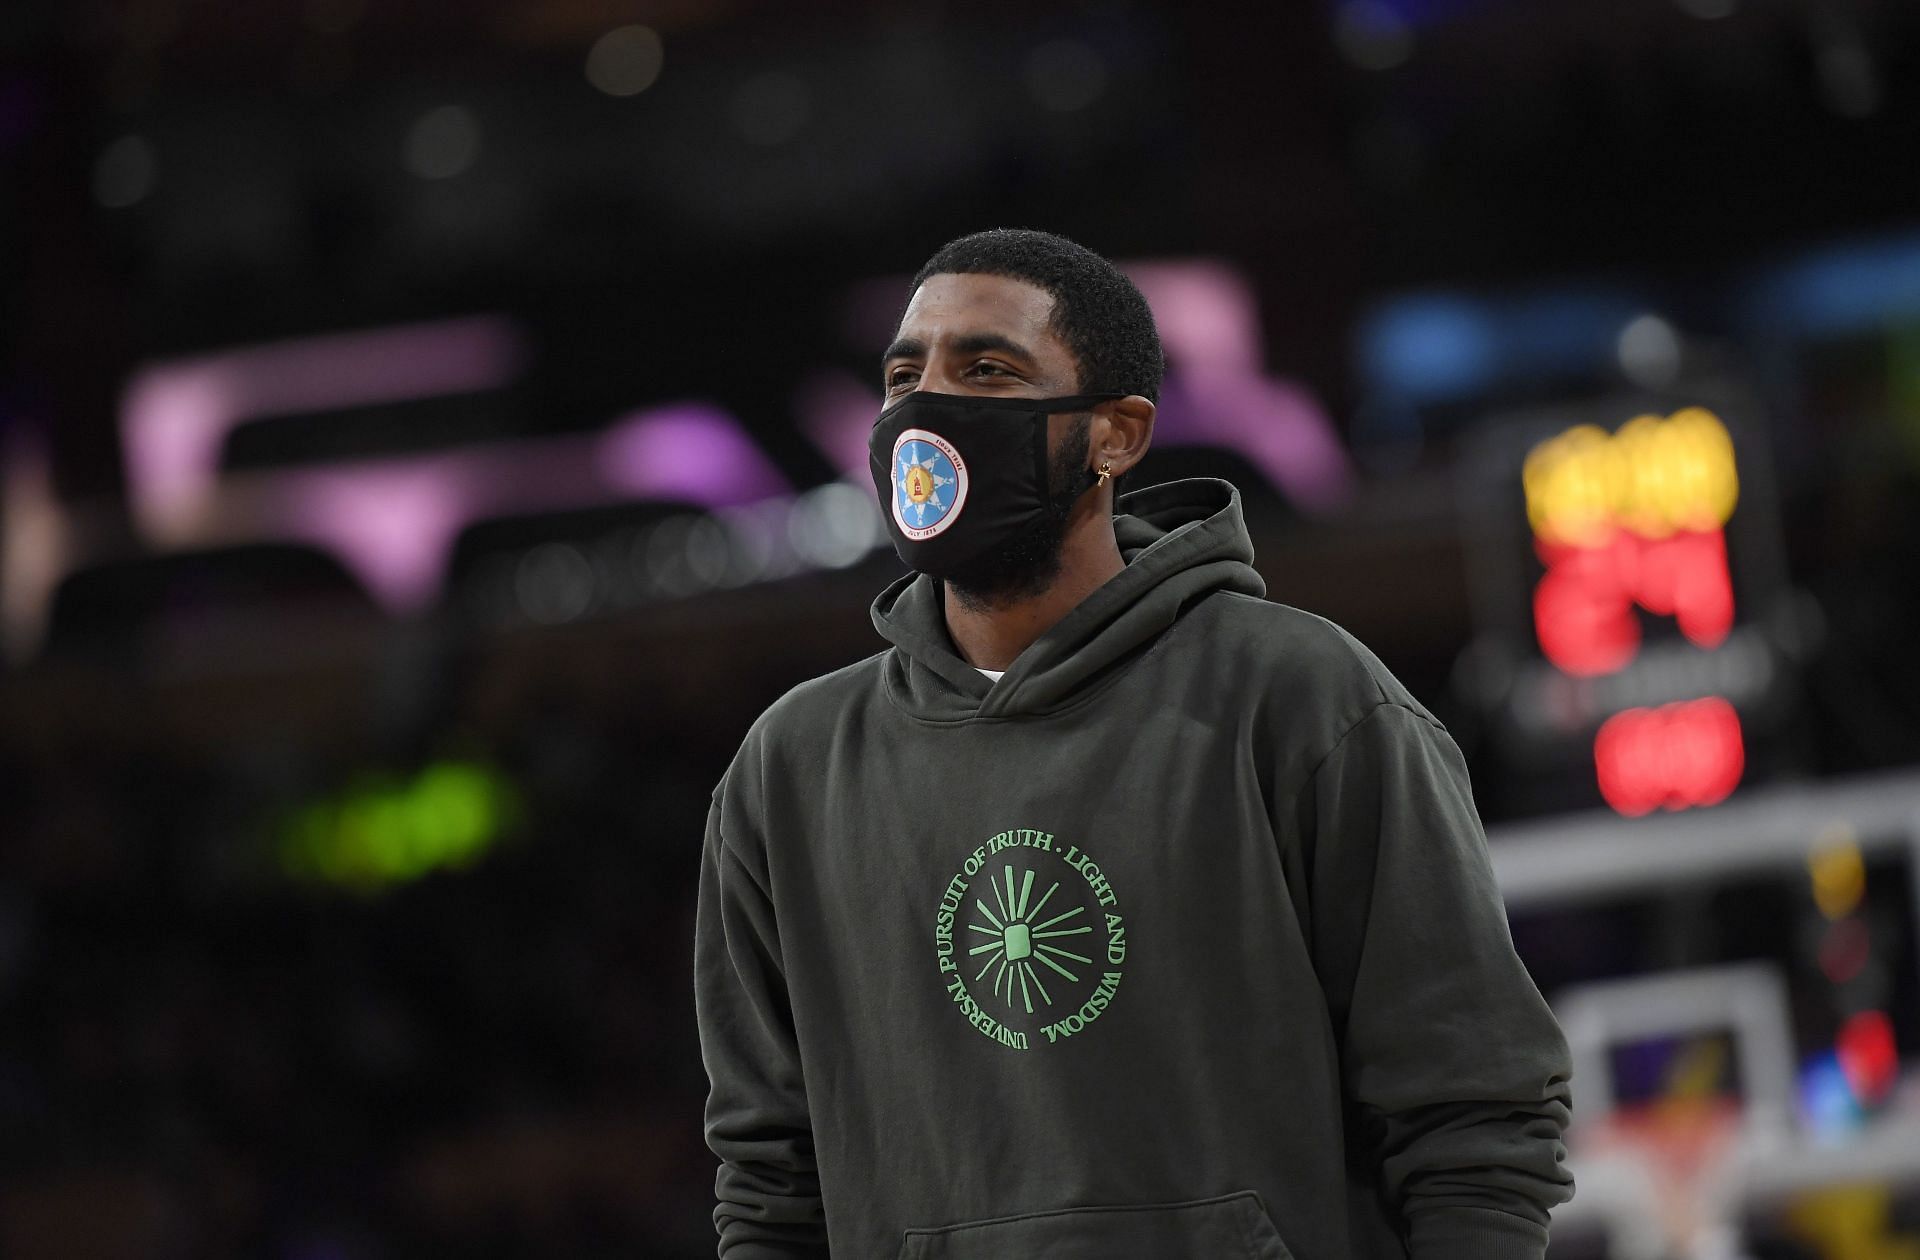 Kyrie Irving cannot play for the Brooklyn Nets unless he gets his COVID-19 vaccination